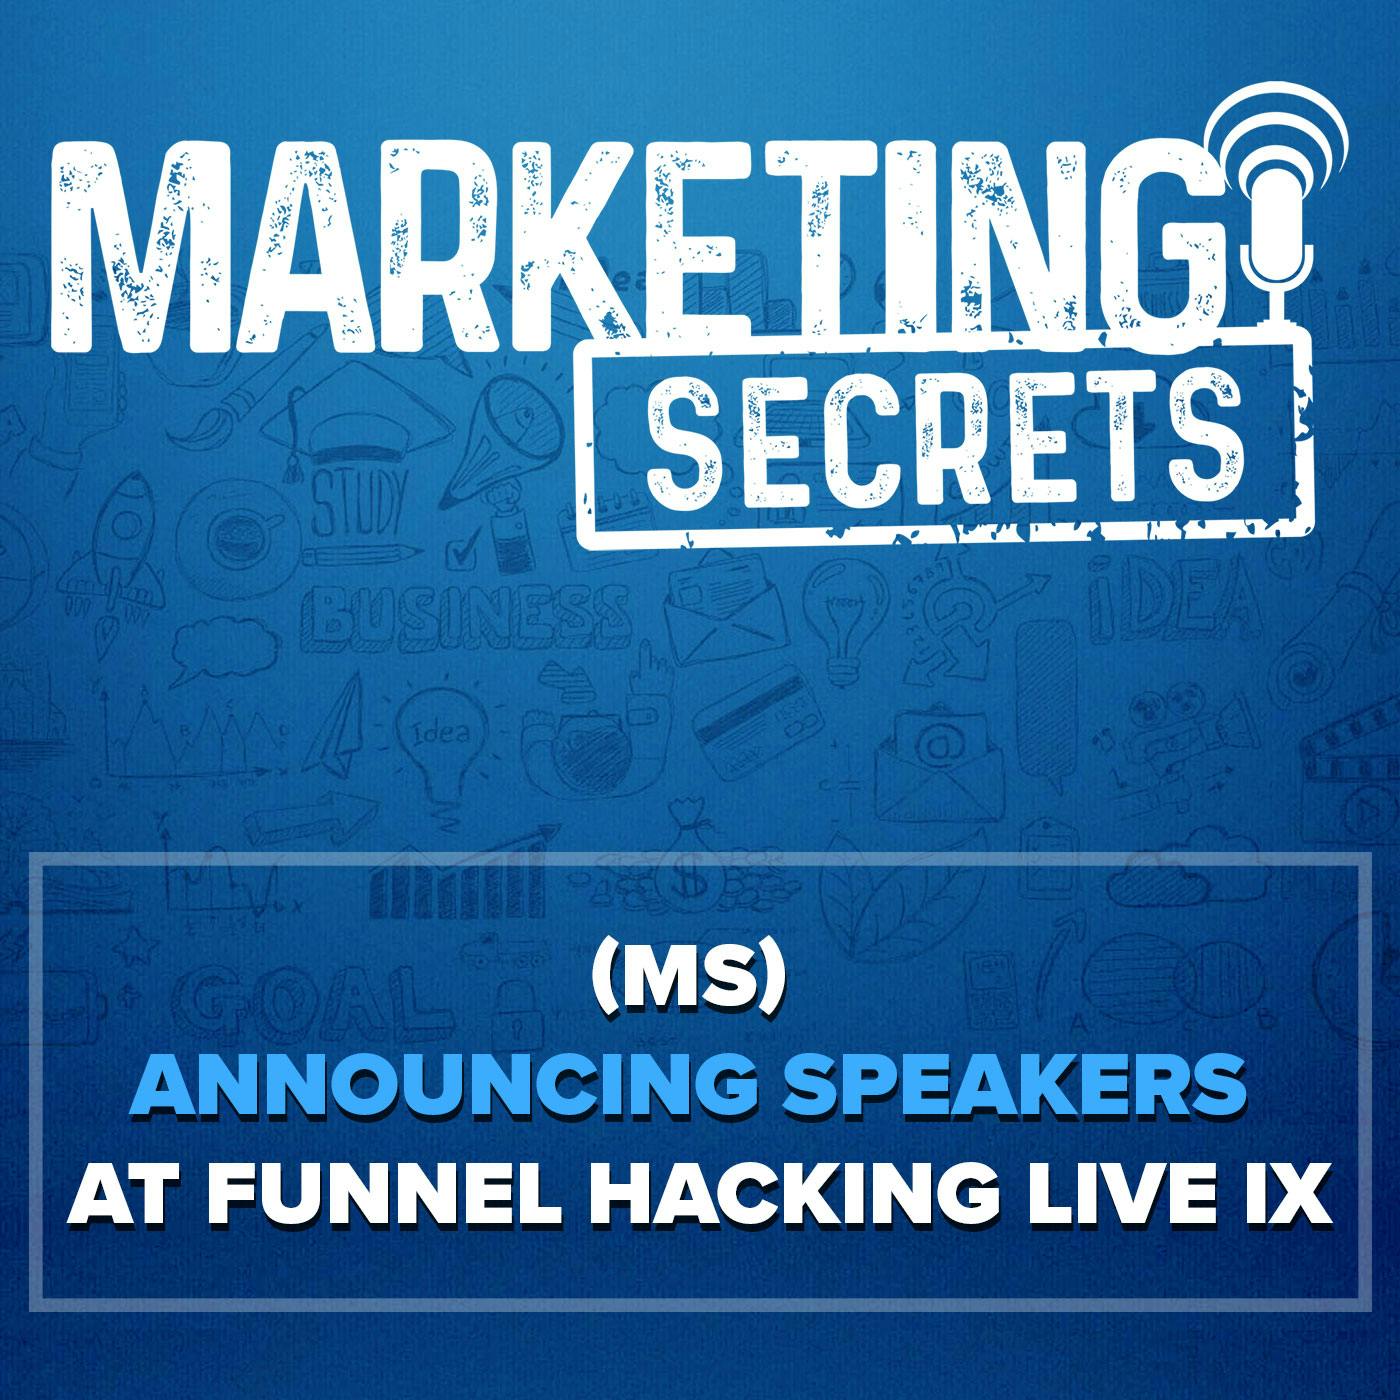 (MS) Announcing Speakers at Funnel Hacking LIVE IX